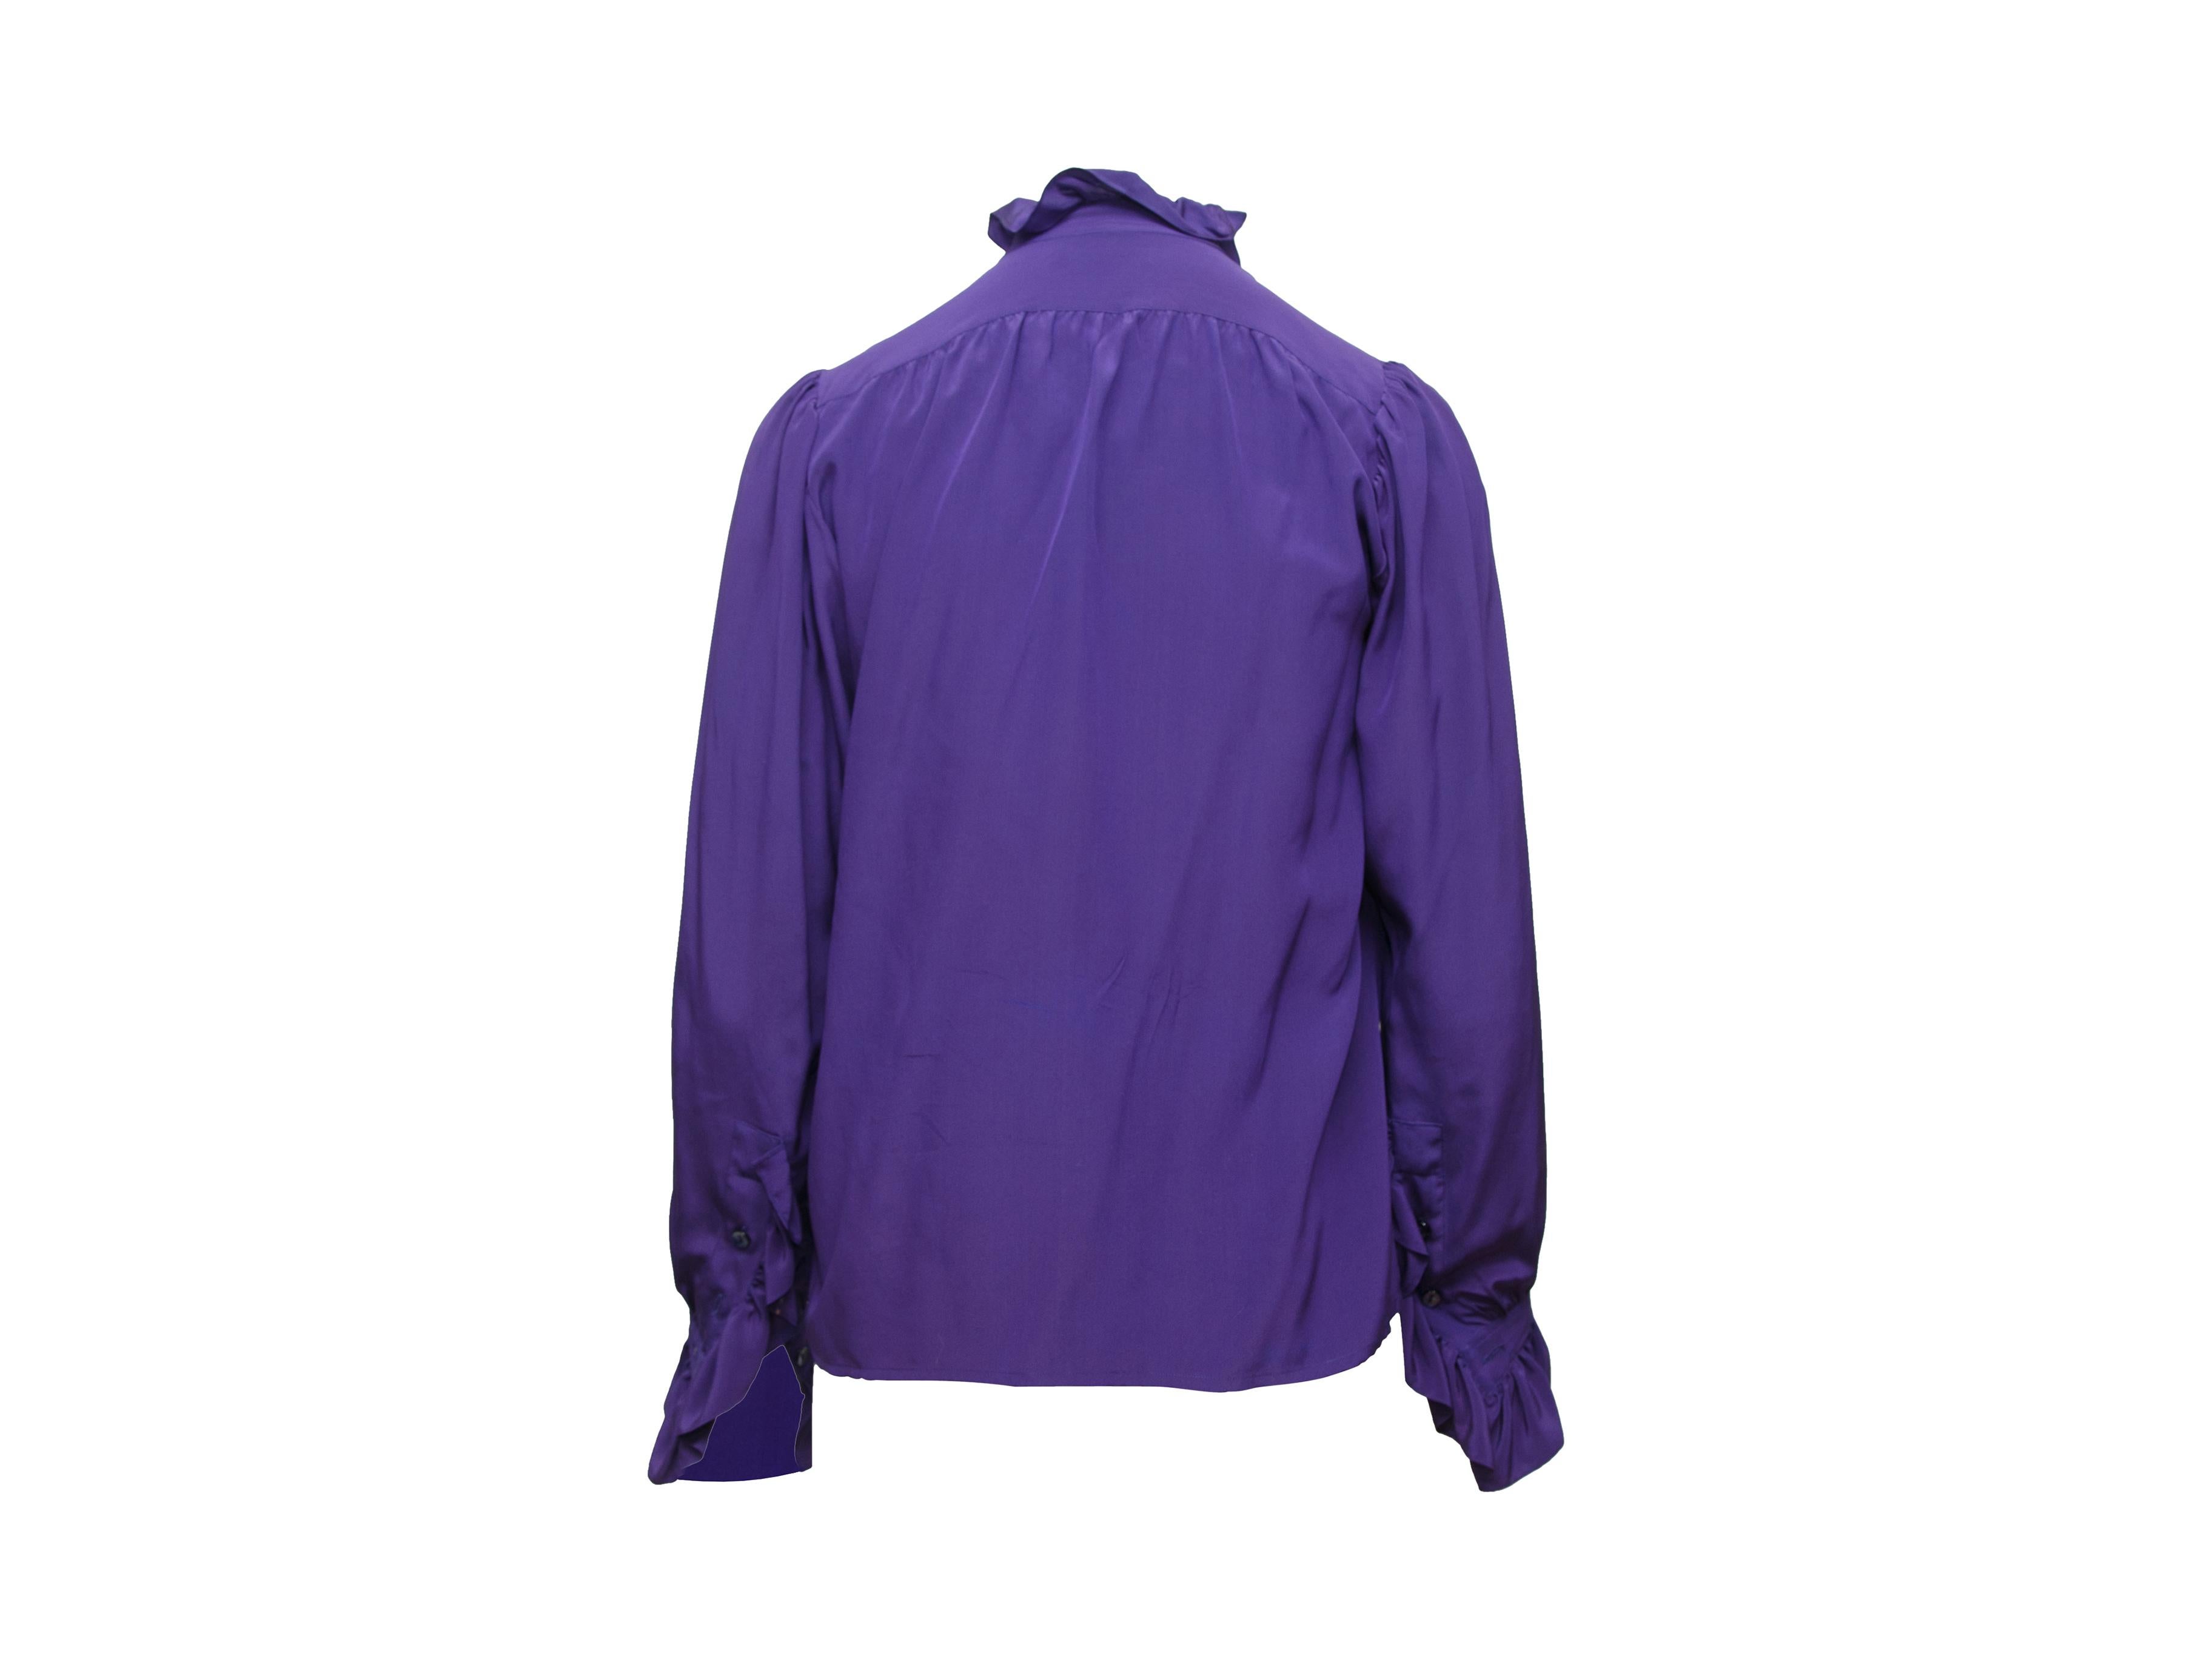 Product details: Vintage purple silk top by Saint Laurent. Ruffle trim throughout. High collar. Long sleeves. Button closures at bust. Designer size 36. 36